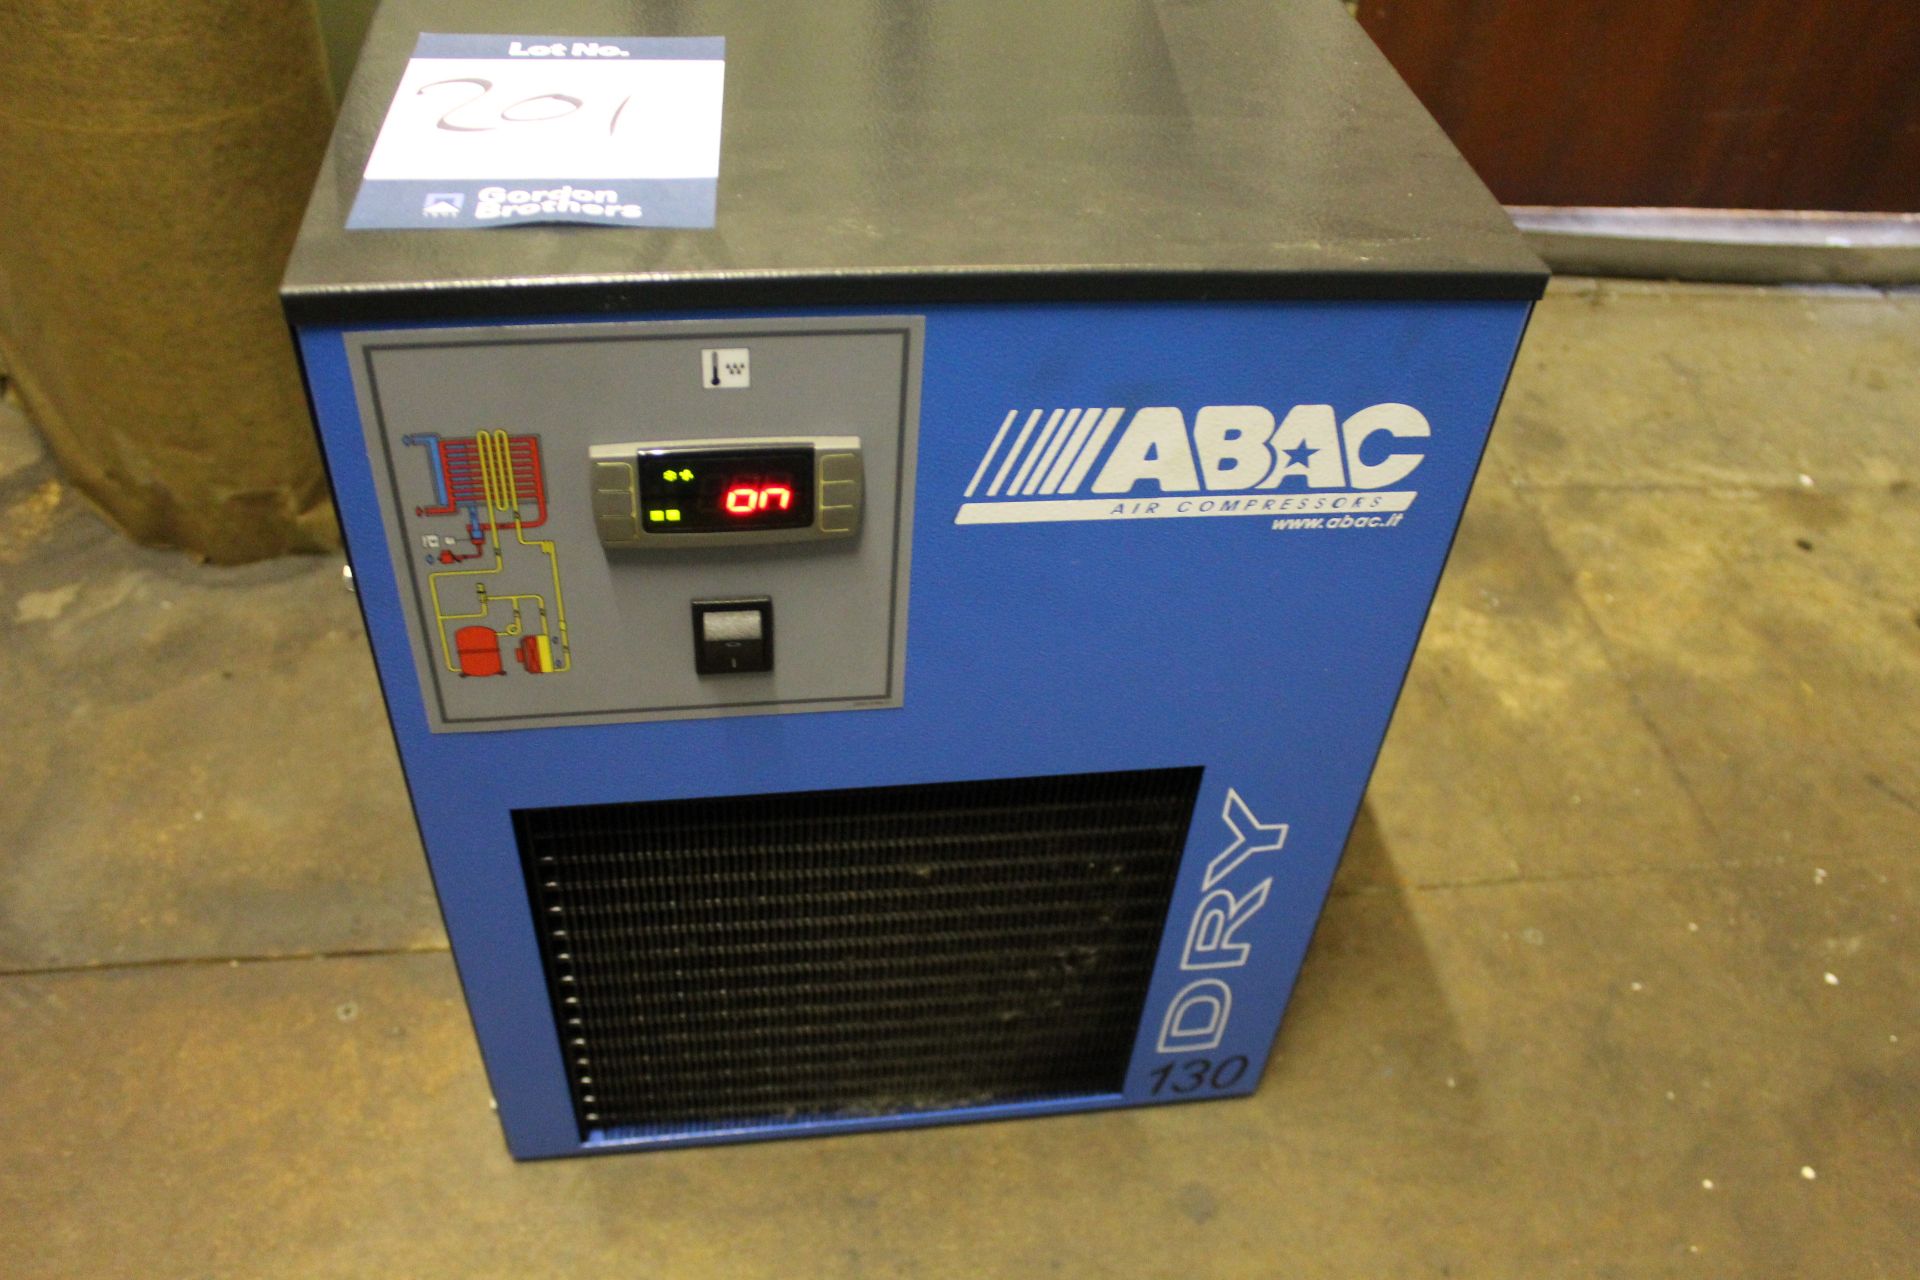 Hydrovane 67 Model: 06708-000 rotary vane air compressor, Serial No. 8909HV771304/3 with Abac Dry - Image 6 of 10